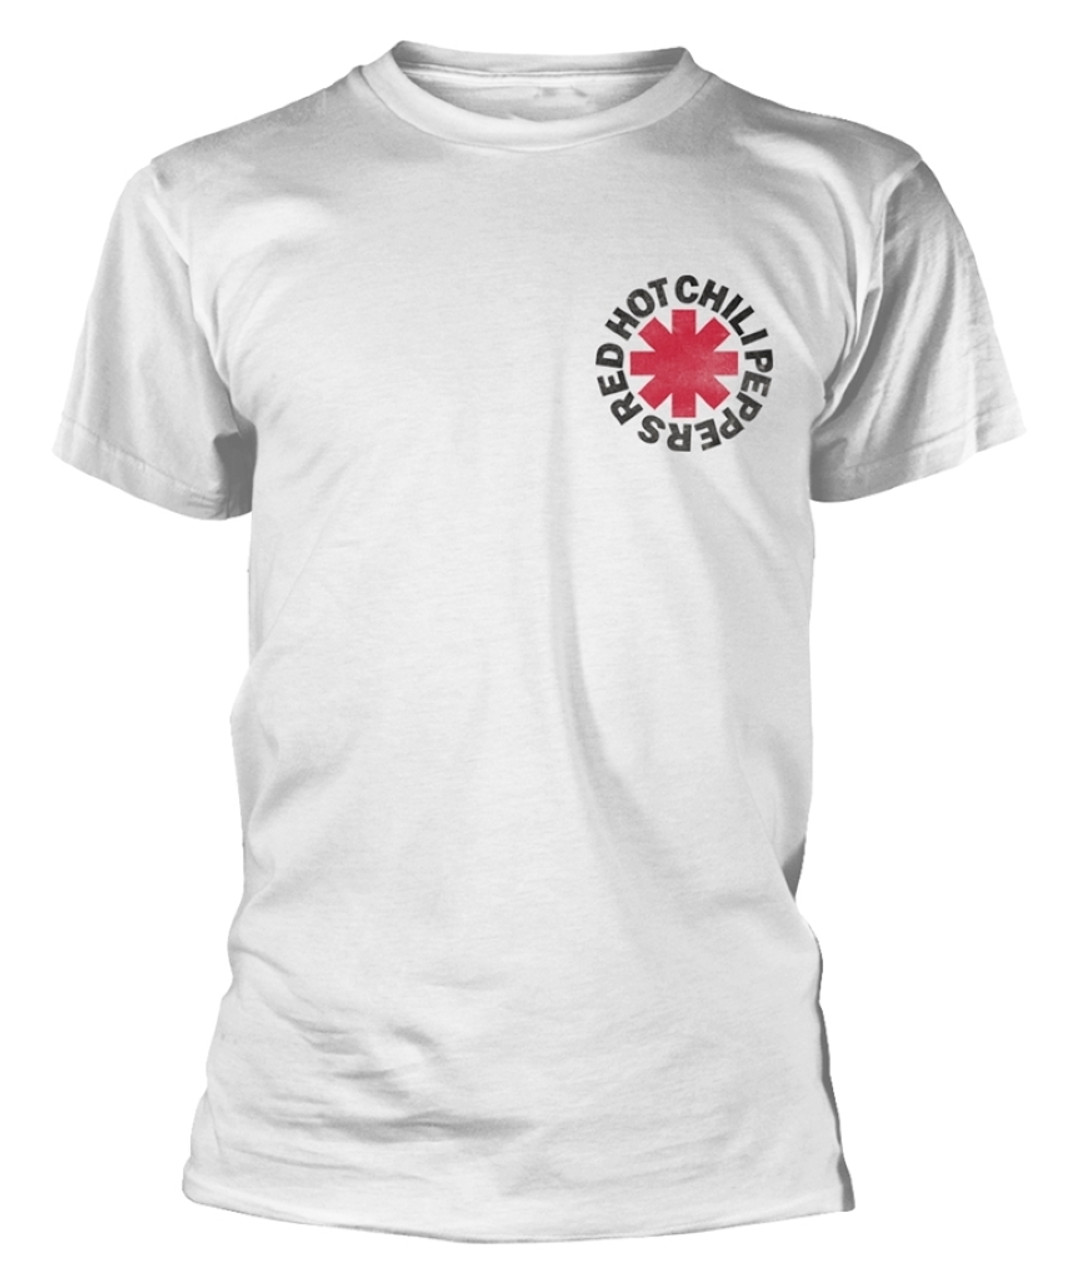 Red Hot Chili Peppers 'Worn Asterisk' (White) T-Shirt